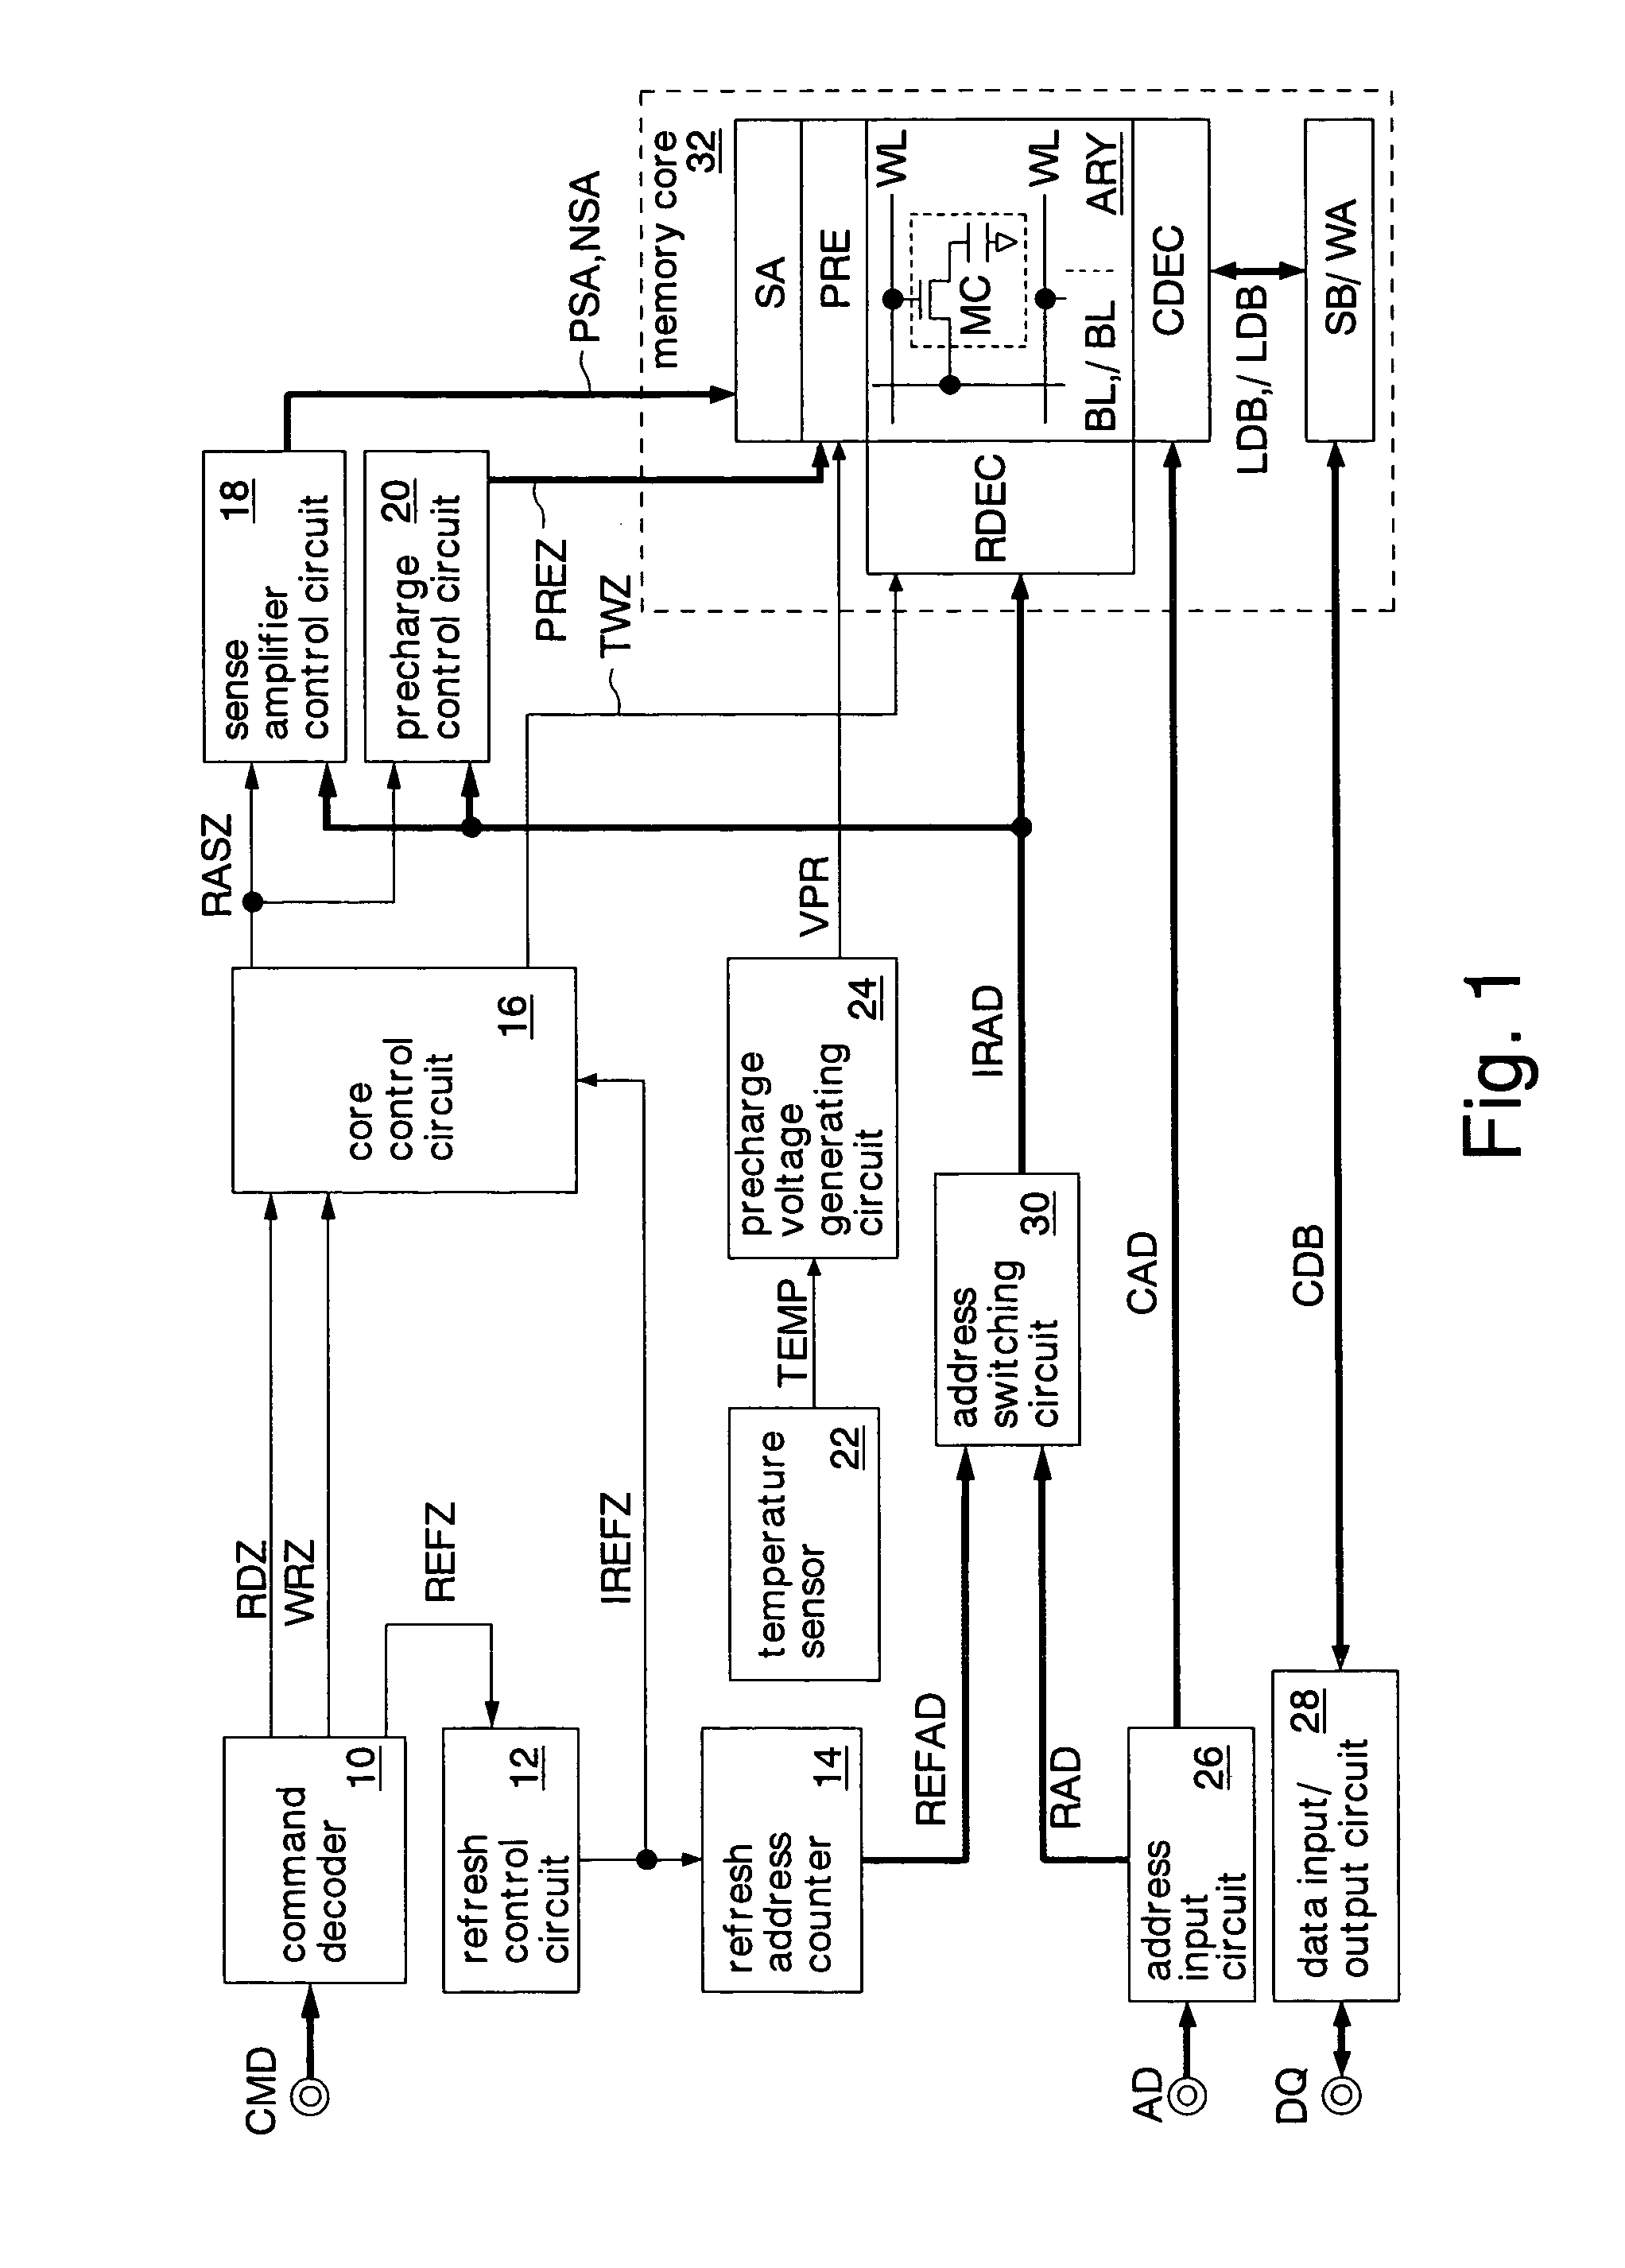 Semiconductor memory having a precharge voltage generation circuit for reducing power consumption